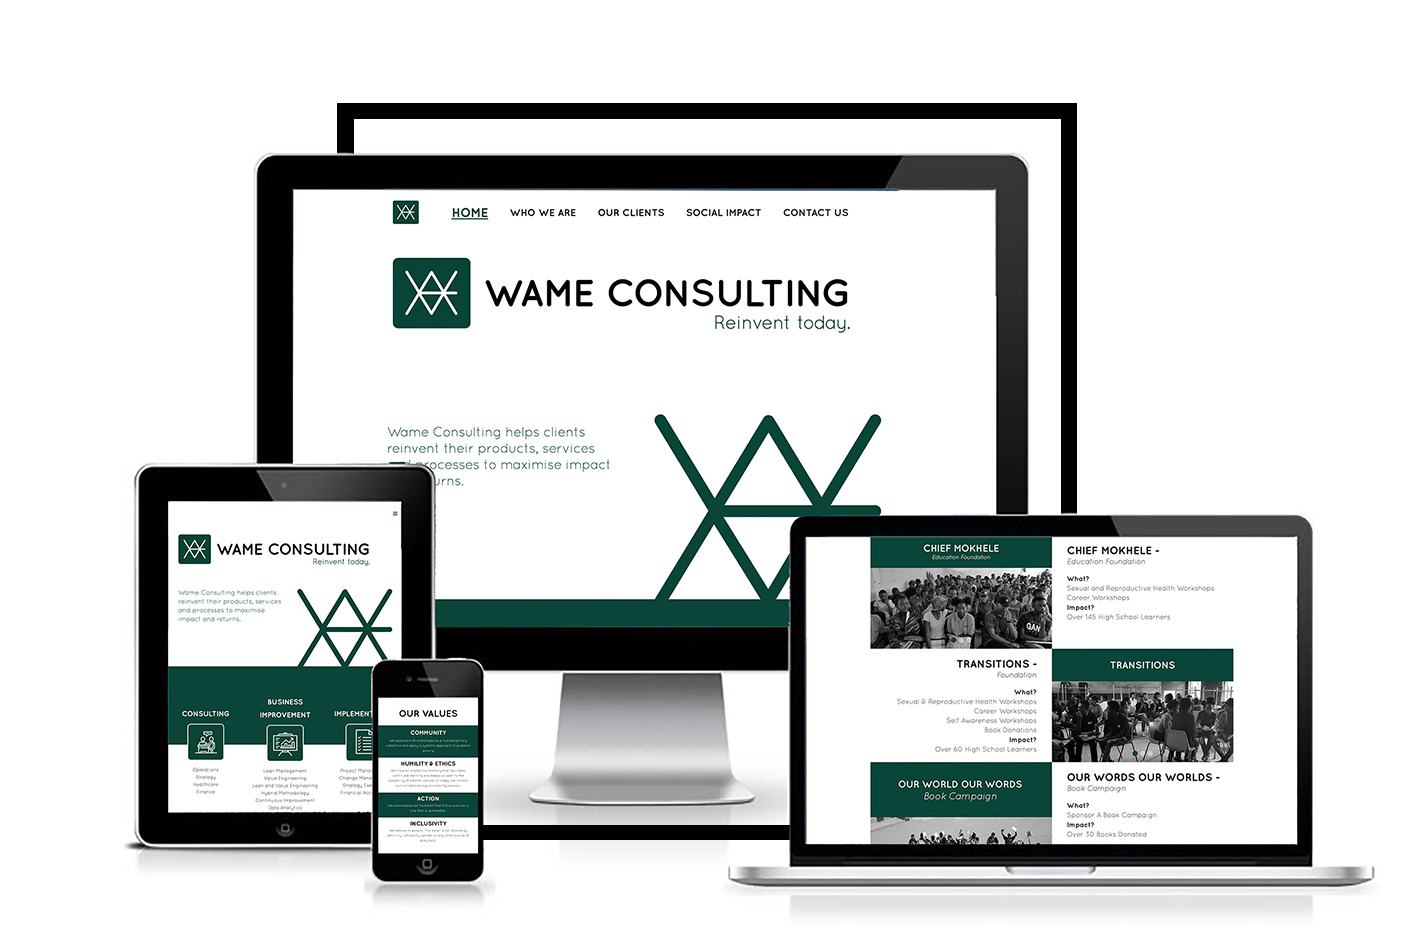 Wame consulting